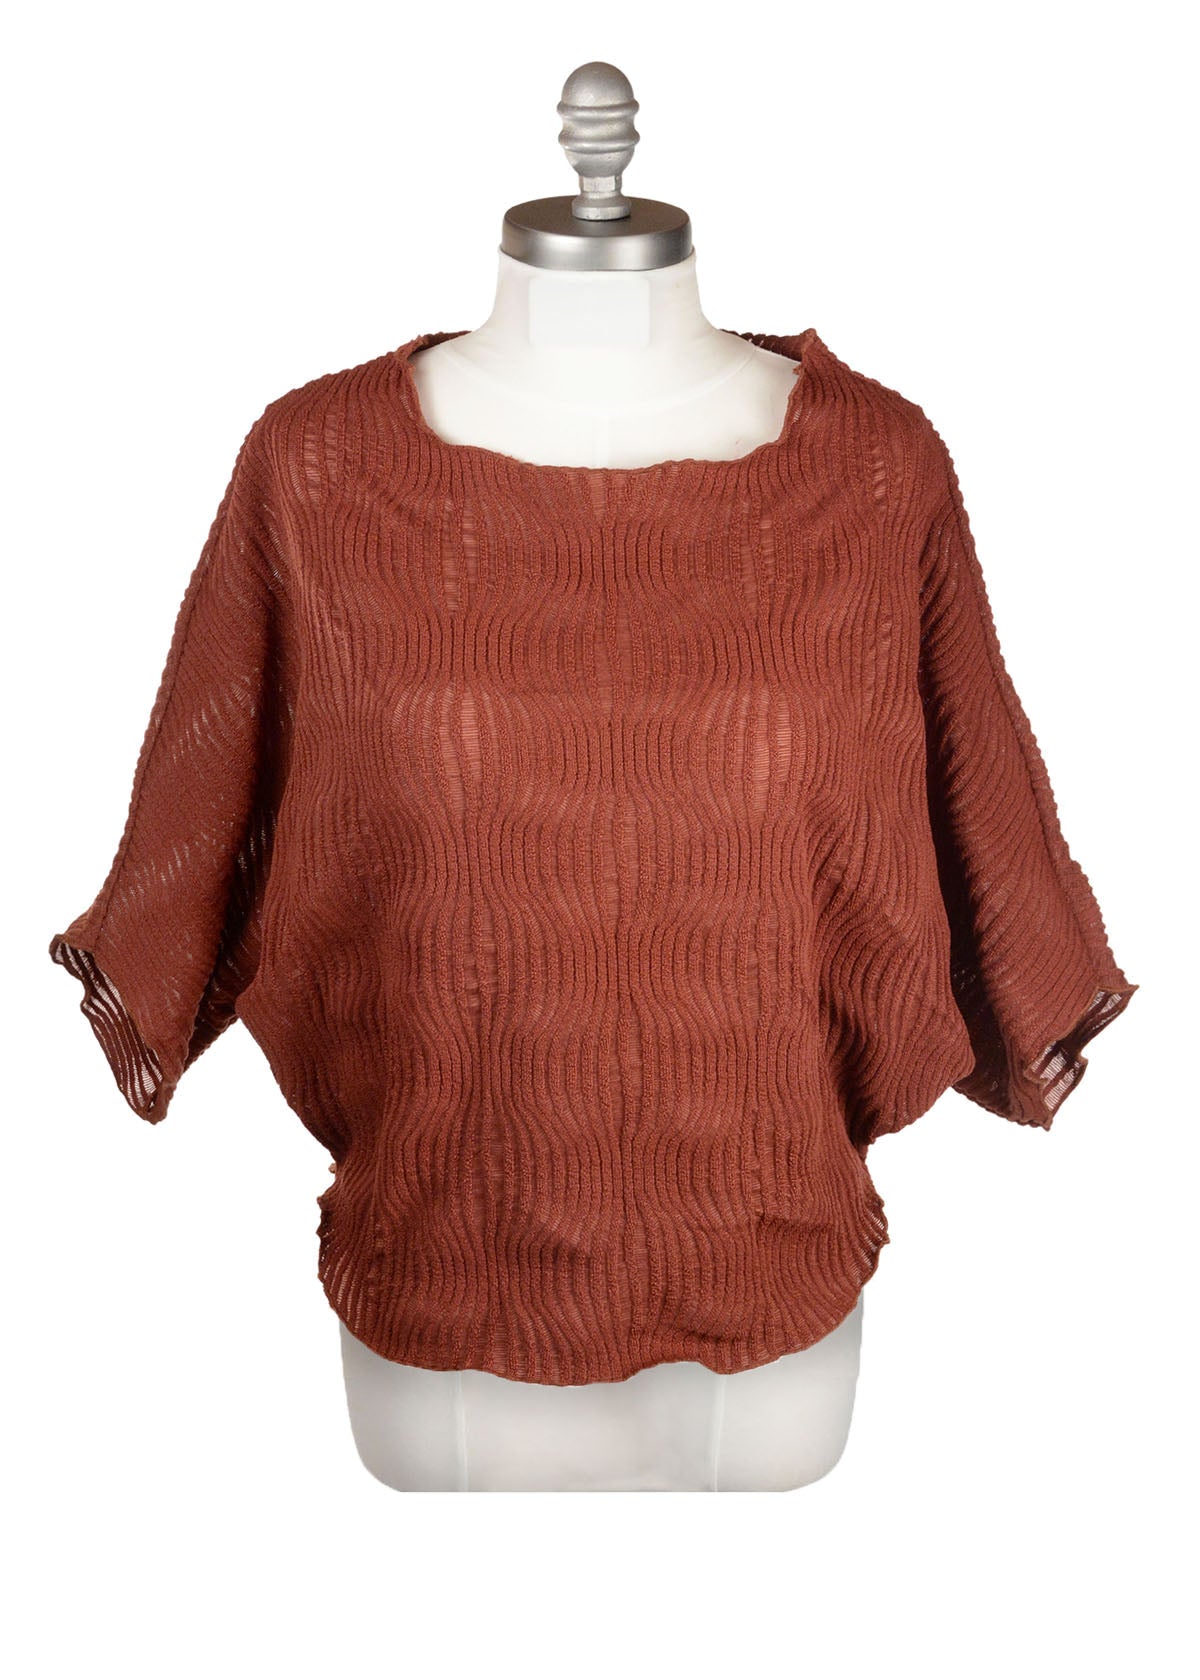 Product photo of the Batwing Top in Burnt Sienna, from the Fractal Collection. LYC and Pandemonium Seattle are handmade in Seattle, WA, USA.